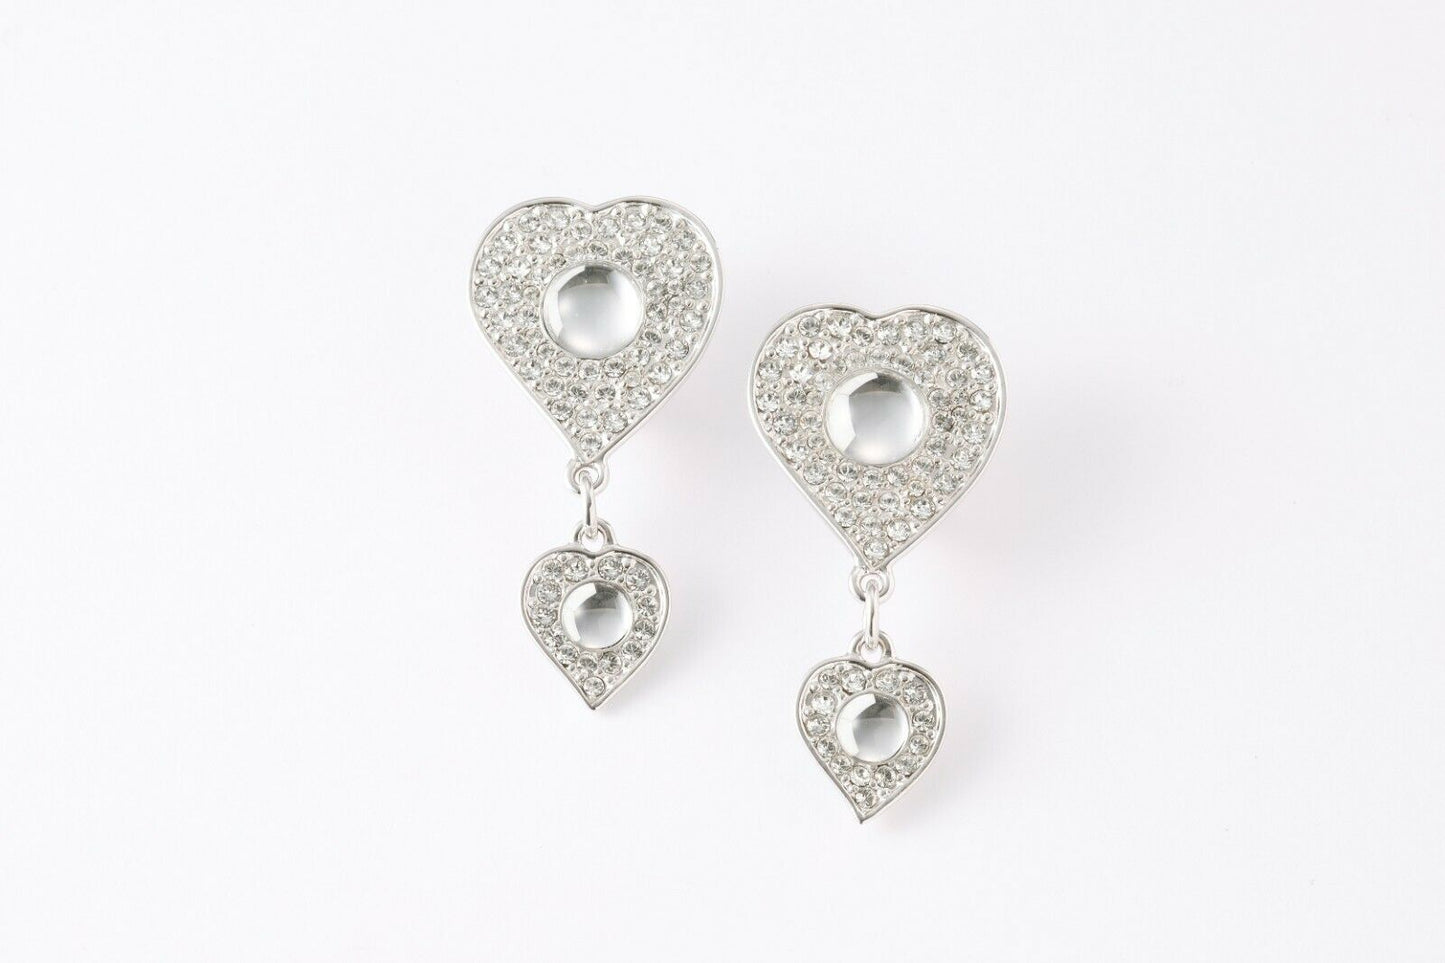 New Heart Dangle Earrings Cabochon Sterling Silver 925 Rhodium / white gold Plated Gorgeous Swarovski Crystal